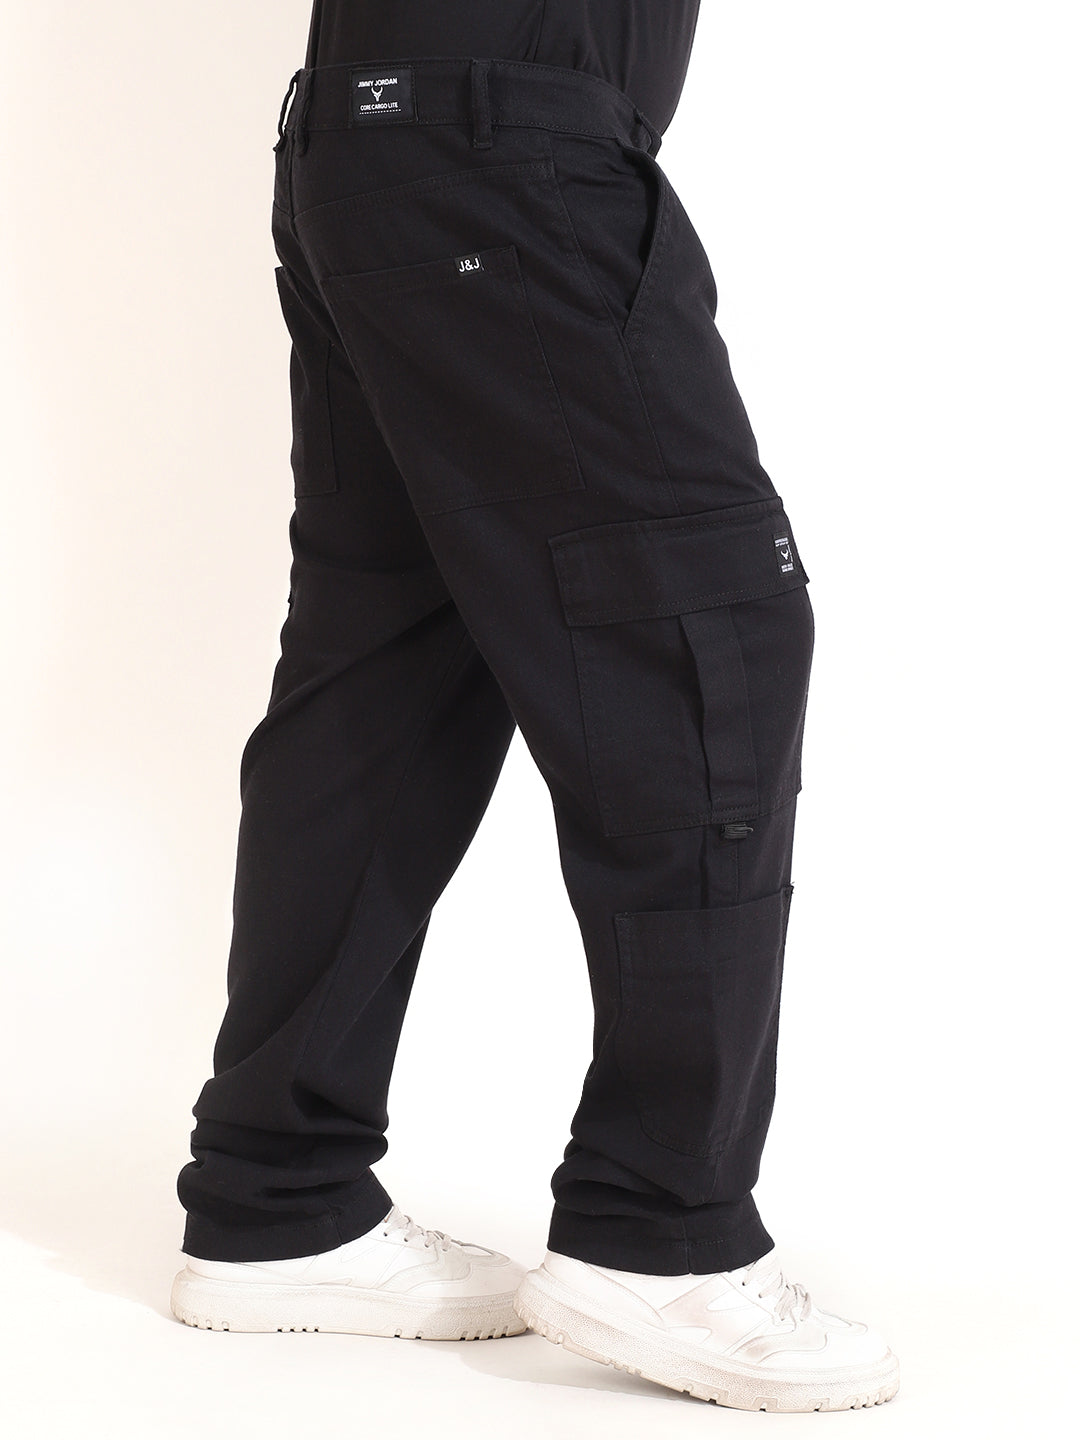 Black Baggy Fit 8 Pocket Drill Cargo